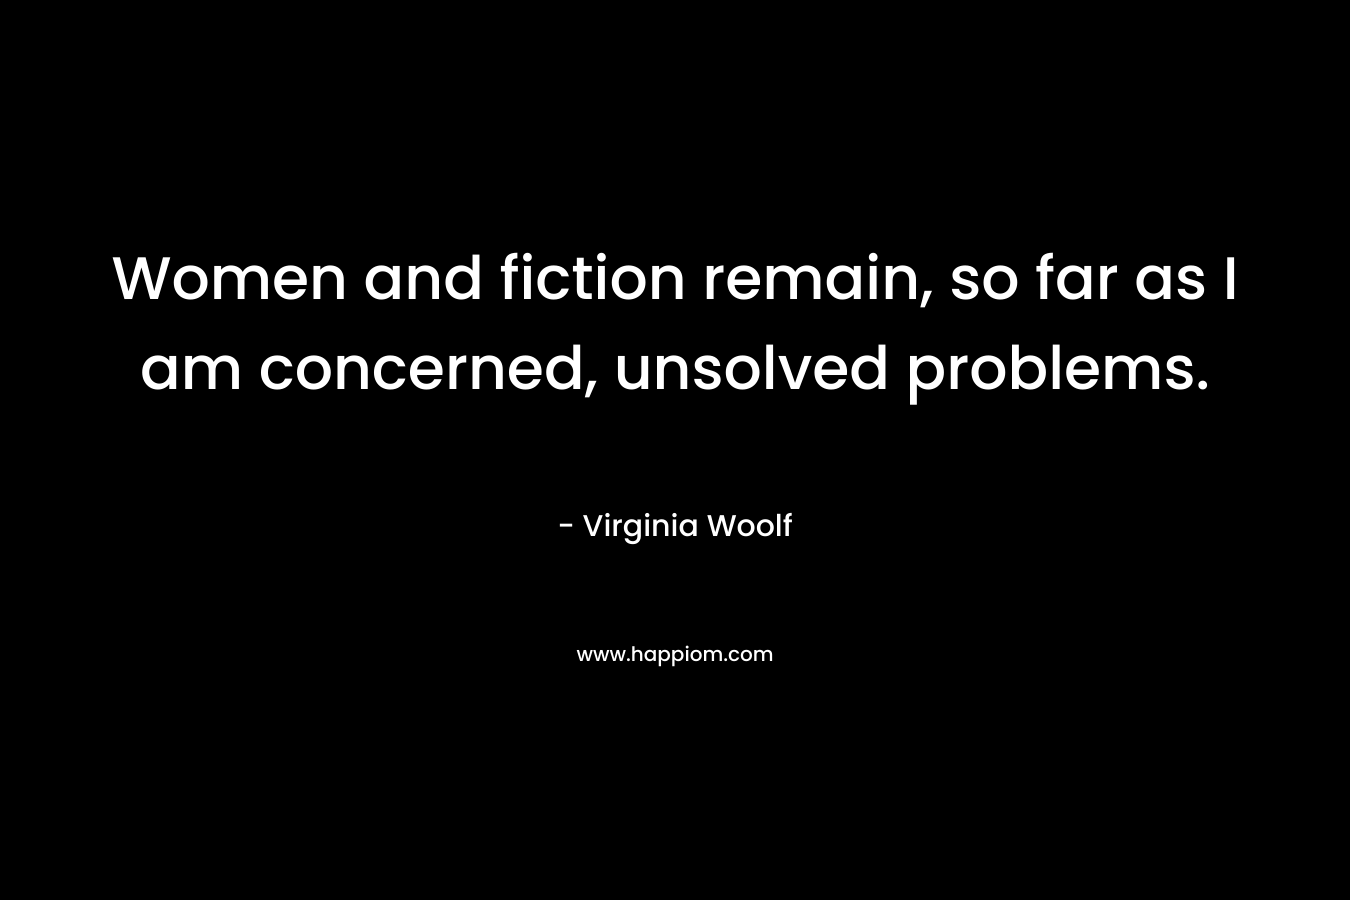 Women and fiction remain, so far as I am concerned, unsolved problems.